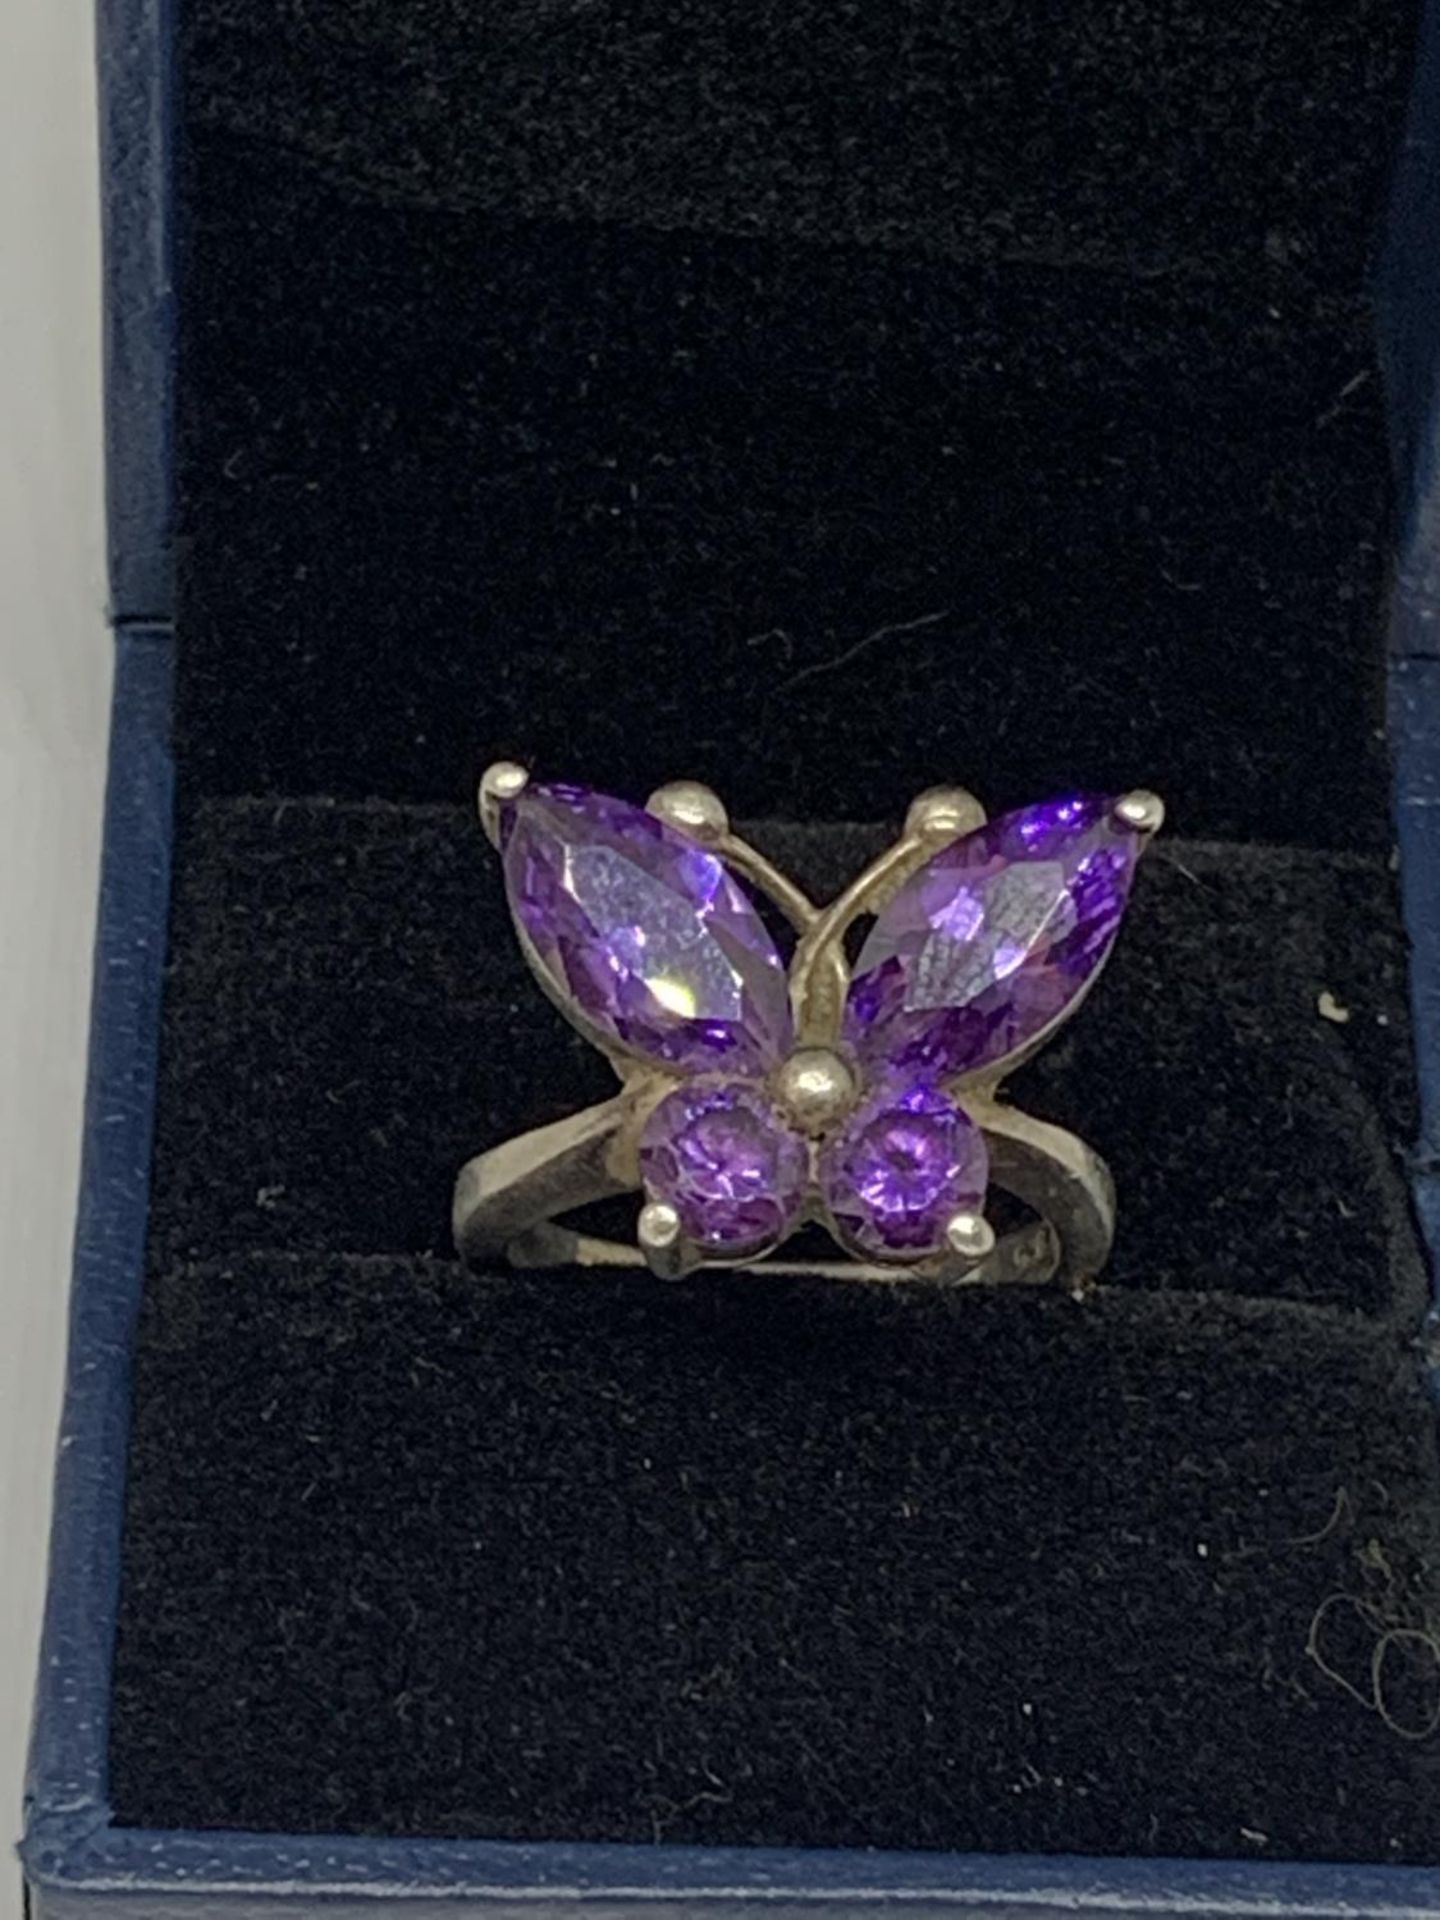 A SILVER RING WITH PURPLE STONES IN A BUTTERFLY DESIGN SIZE M IN A PRESENTATION BOX - Image 3 of 3